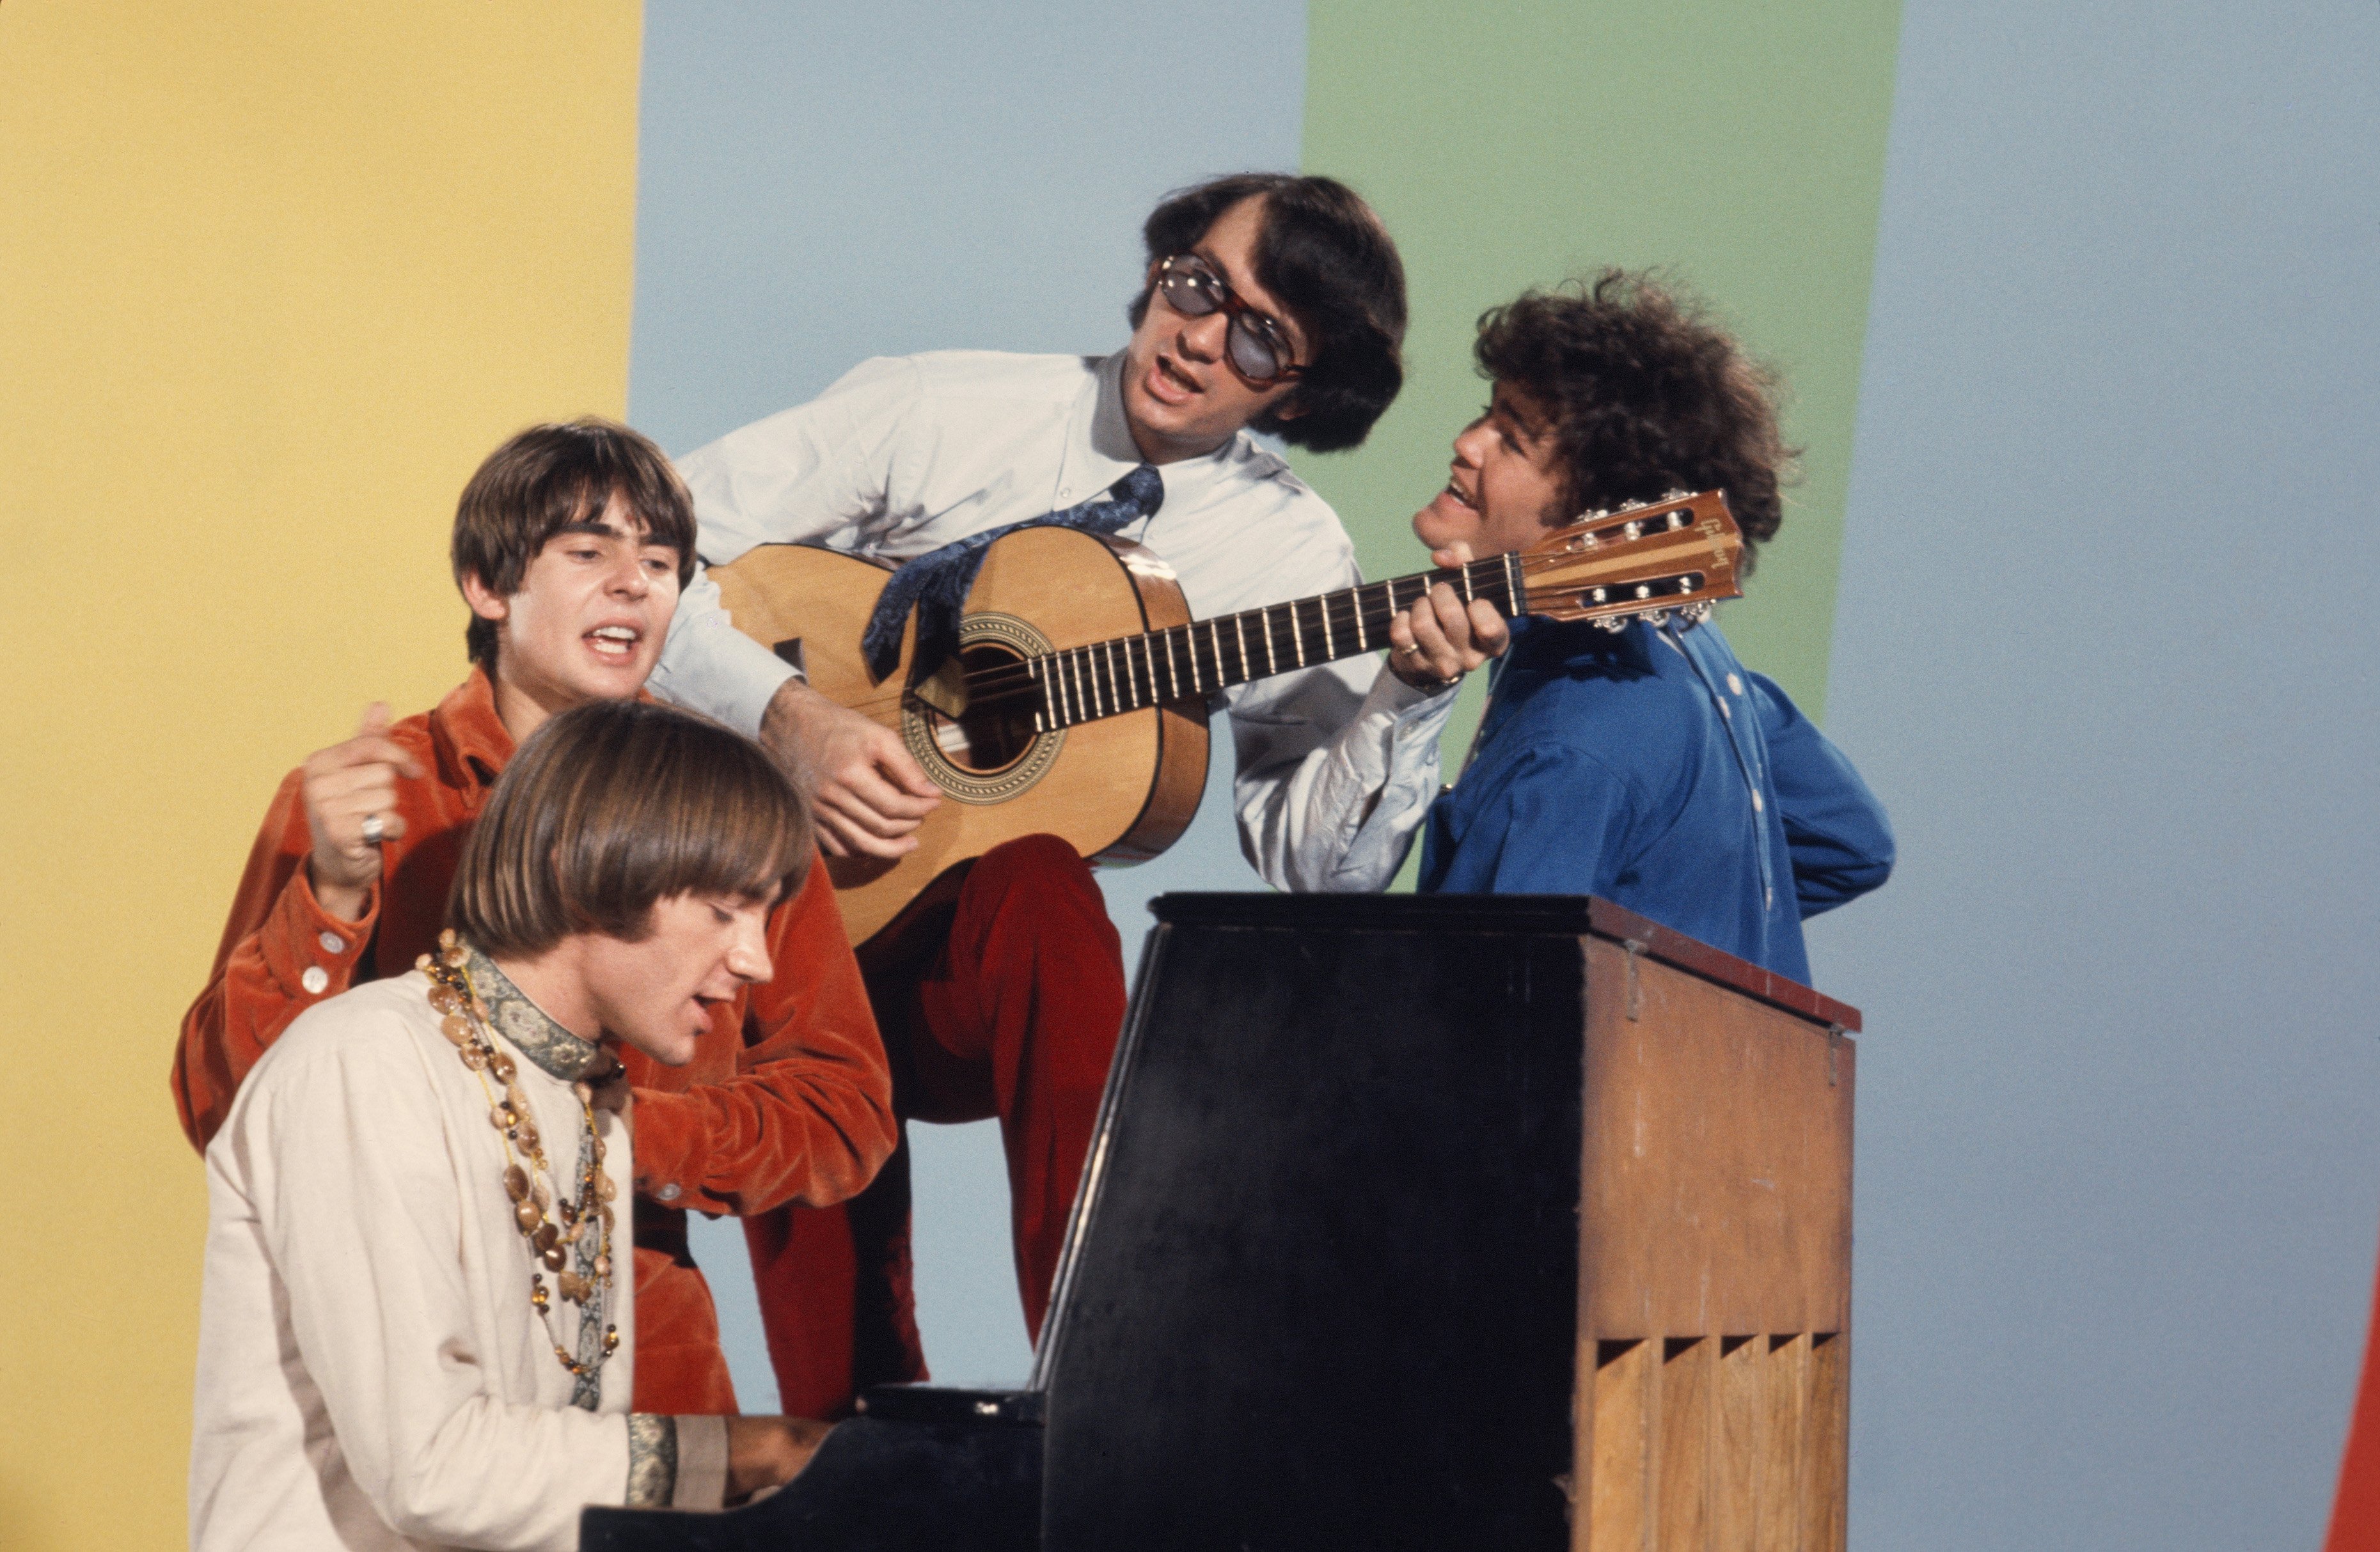 Davy Jones, Mickey Dolenz, Peter Tork and Mike Nesmith on the set of the television show The Monkees in August 1967 in Los Angeles, California. | Source: Getty Images